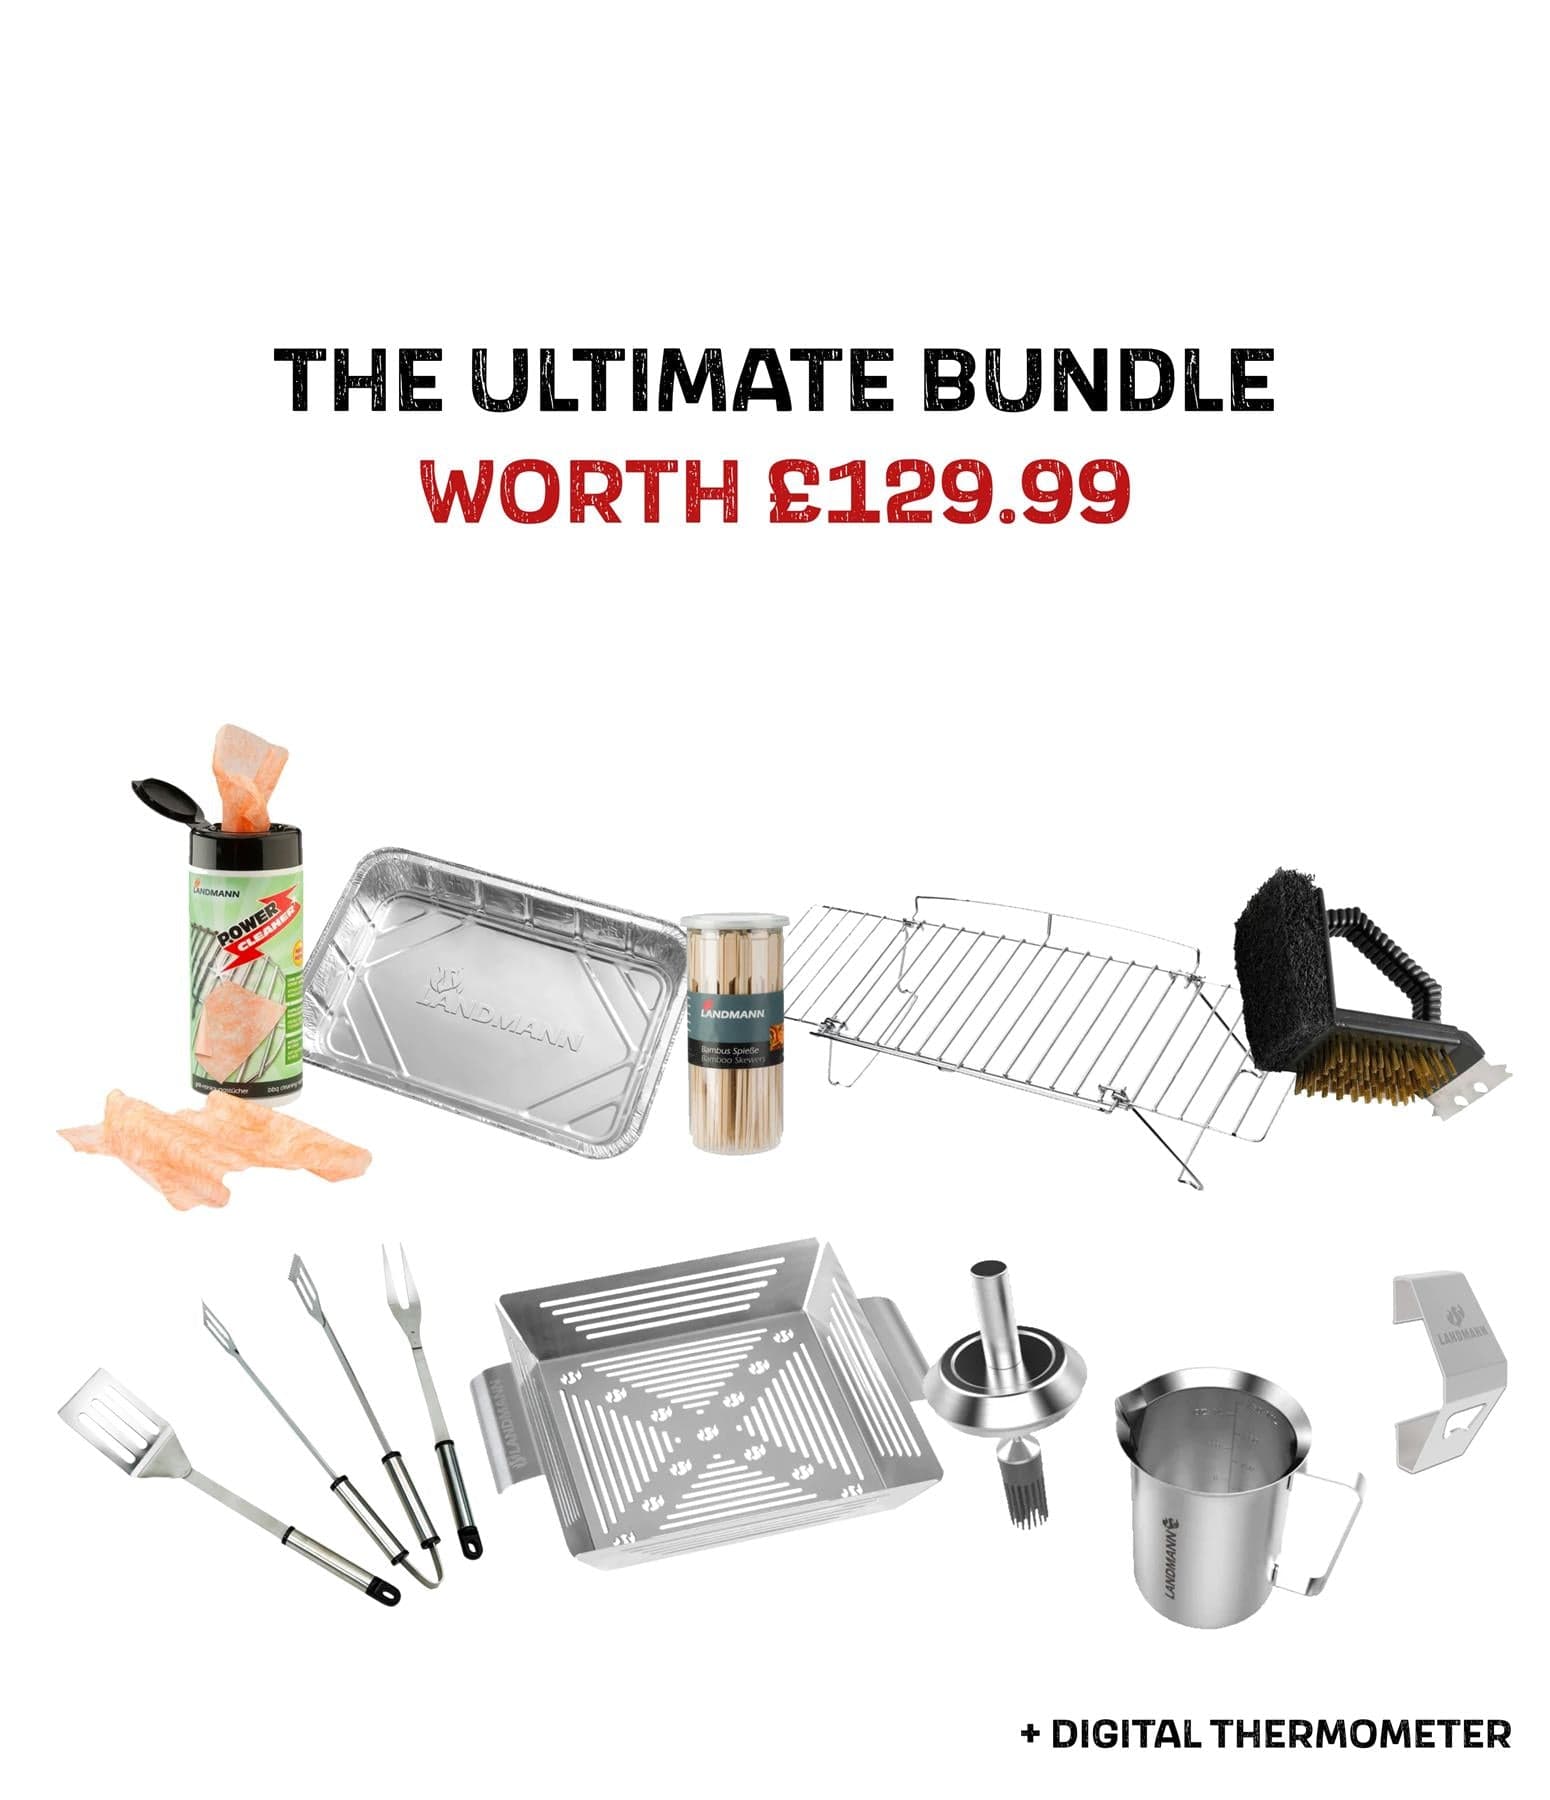 The Ultimate BBQ Bundle